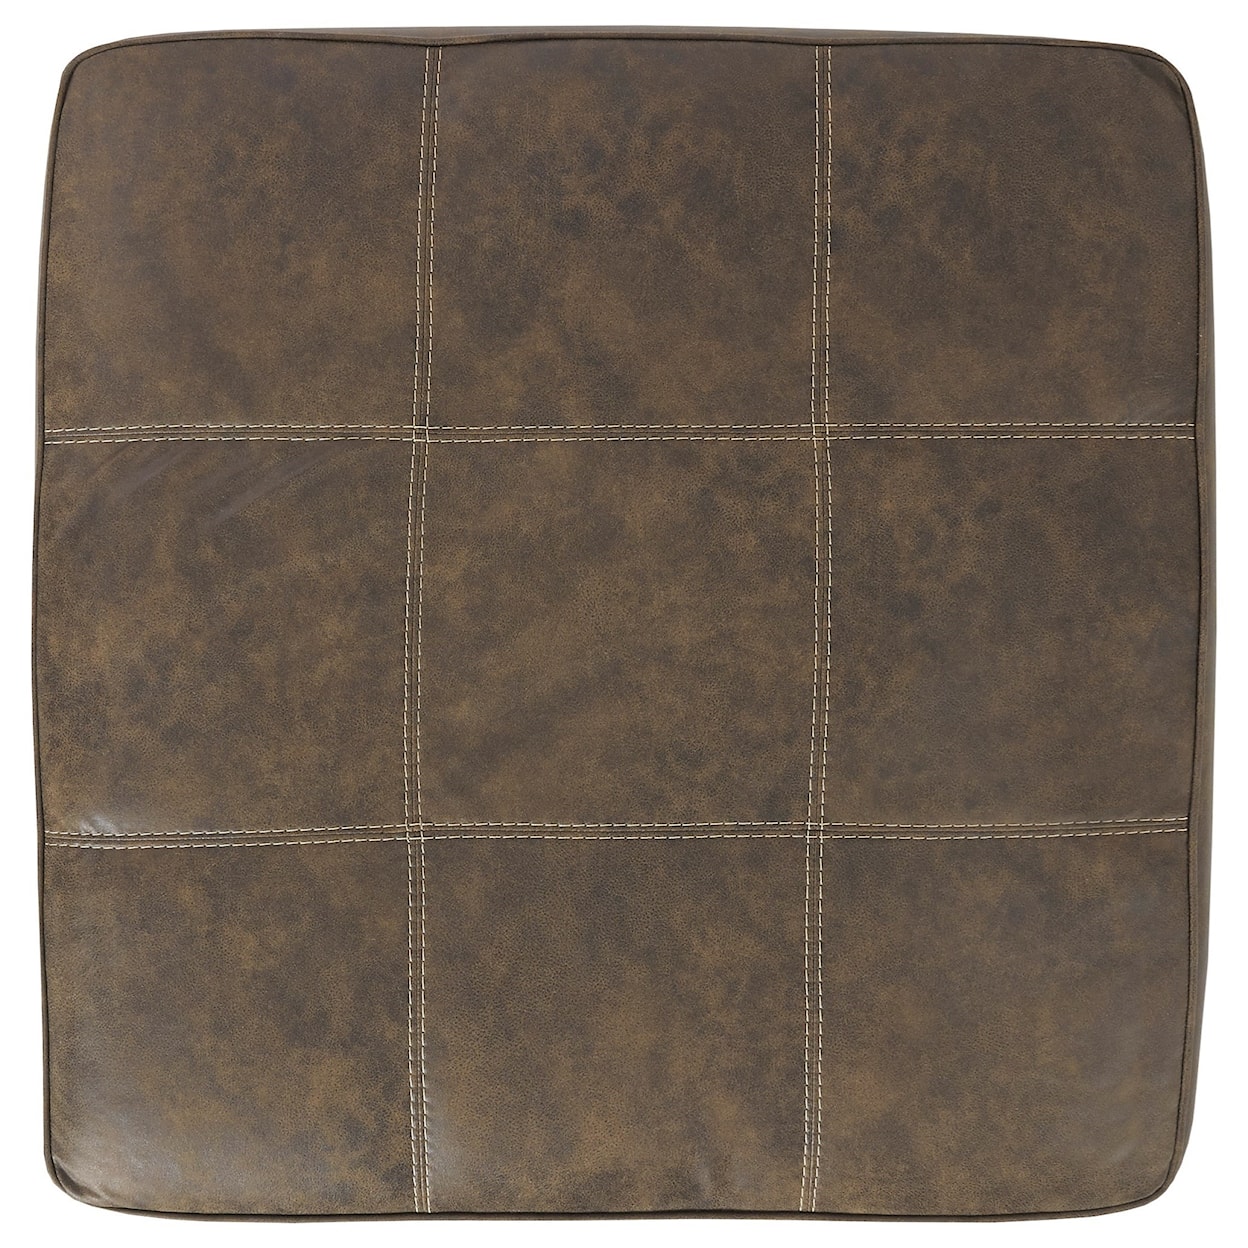 Benchcraft Abalone Oversized Accent Ottoman